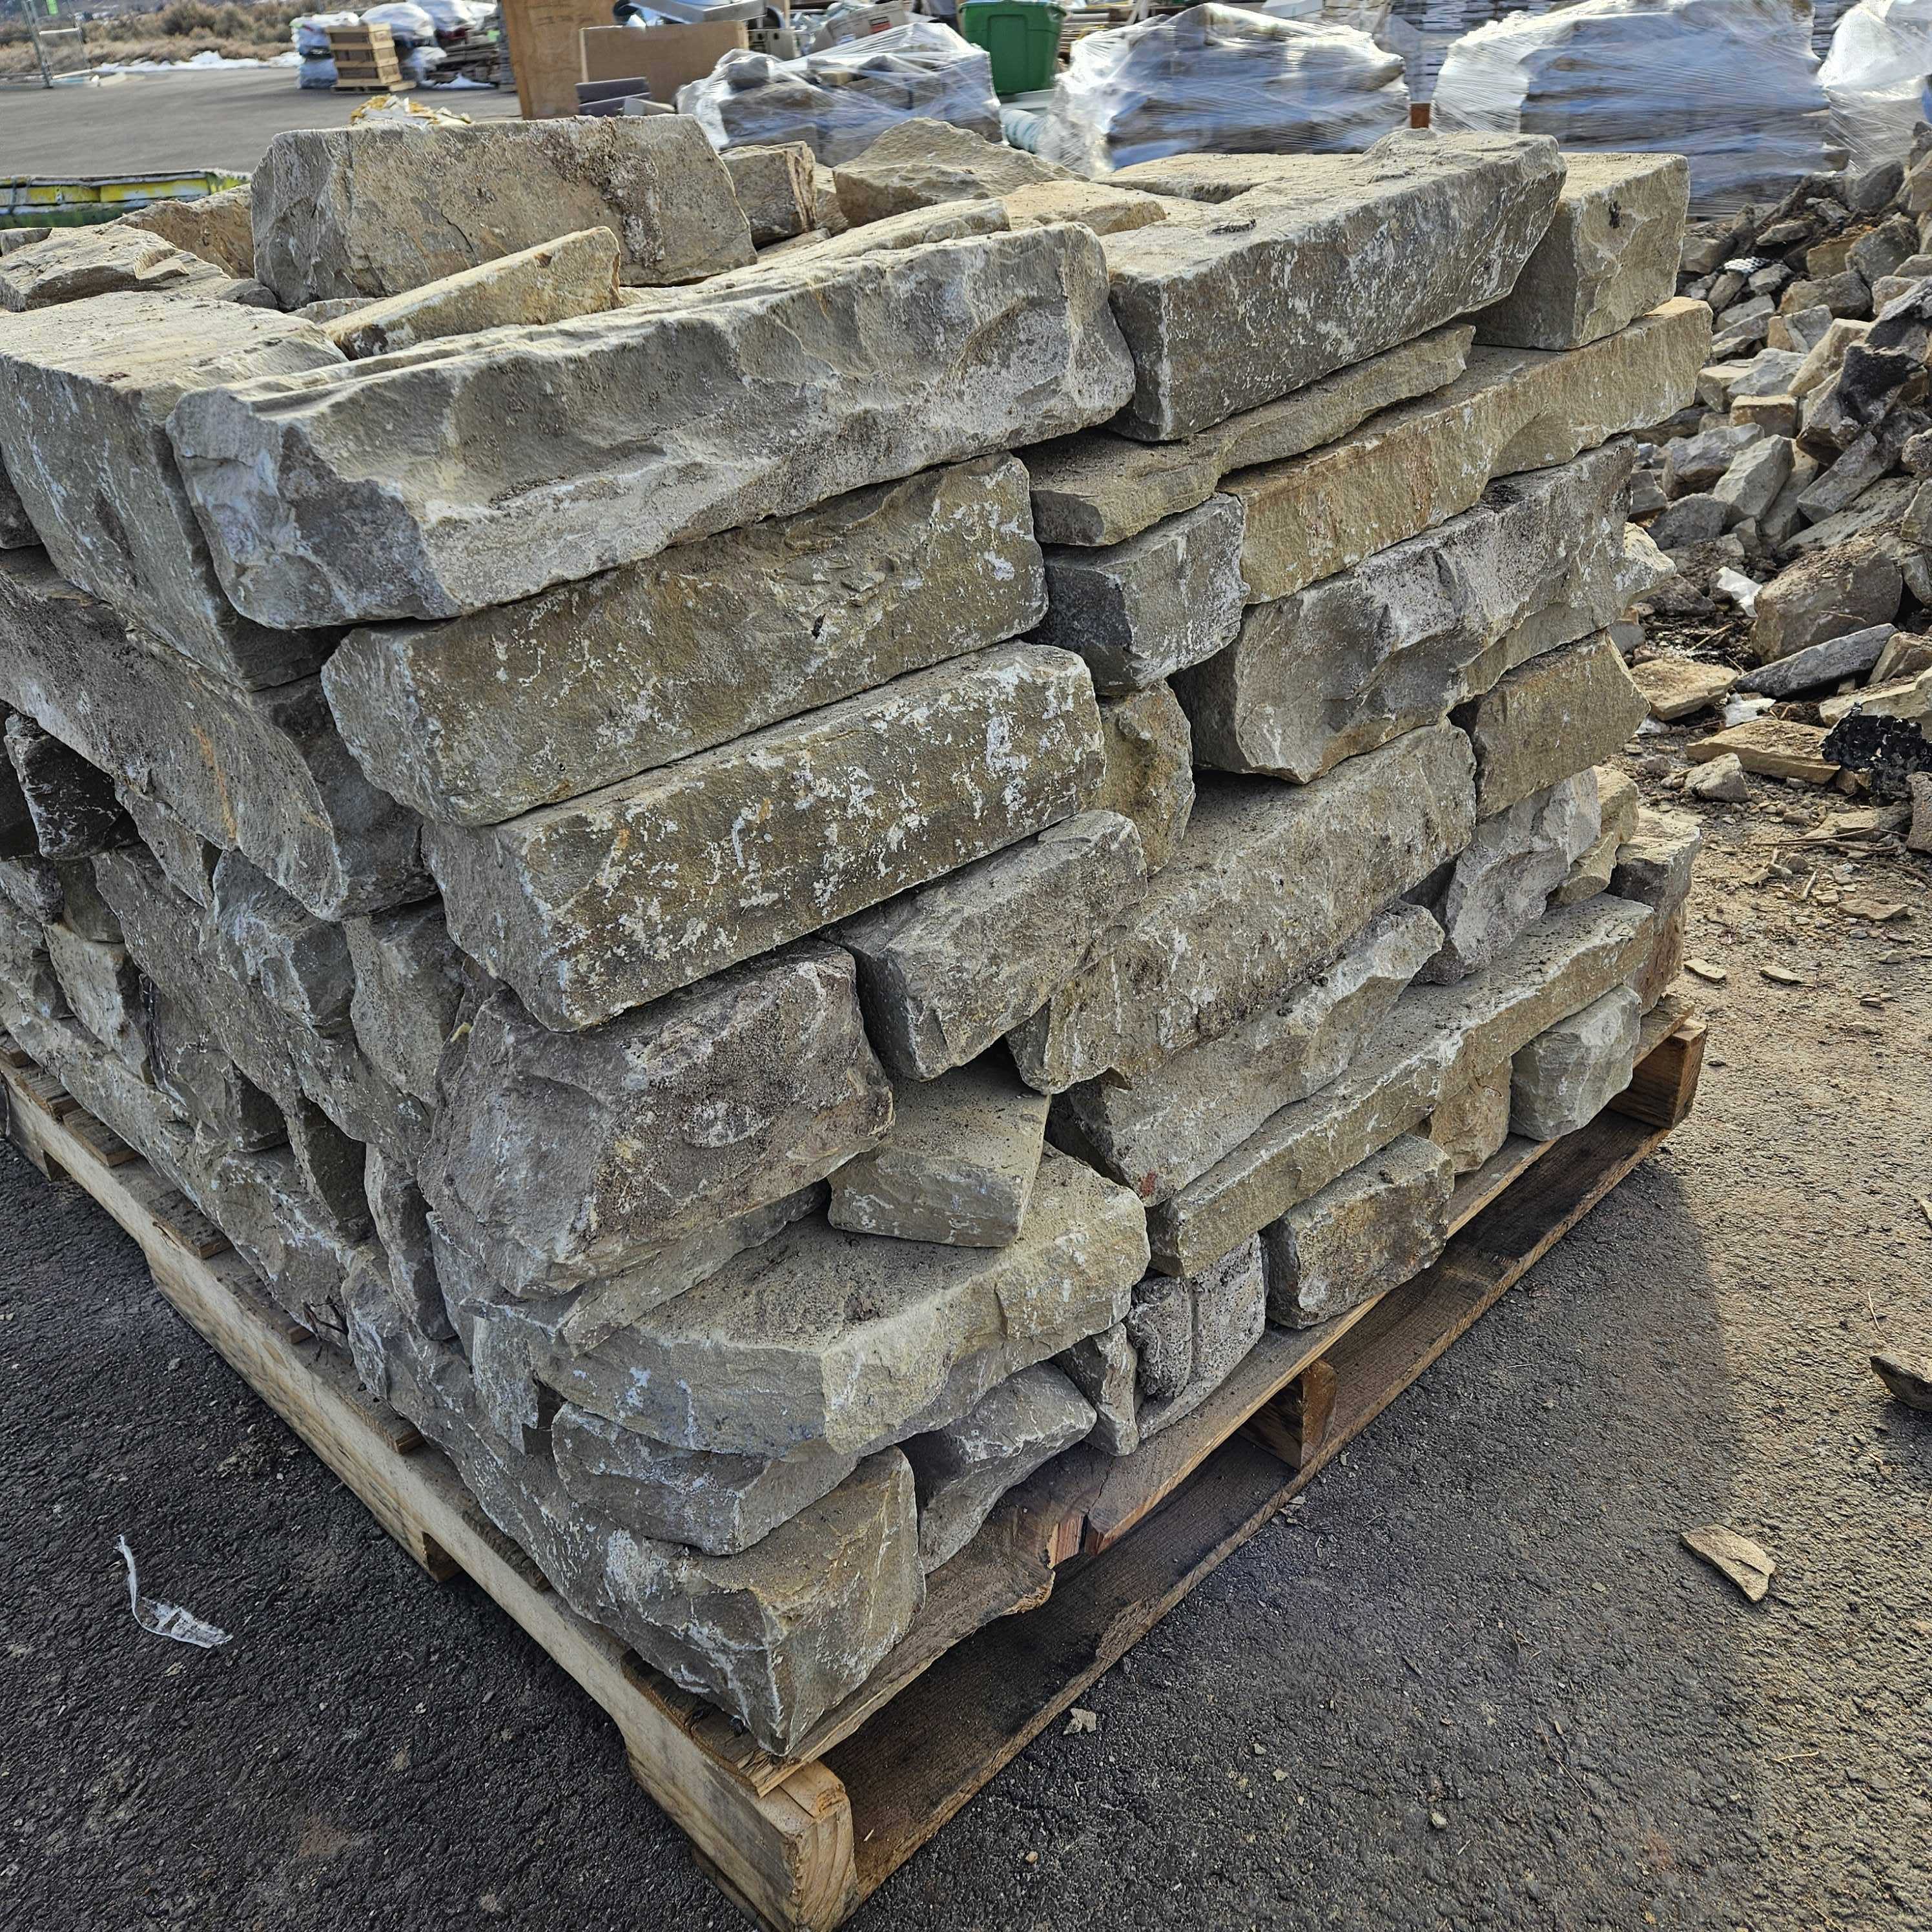 5"x 4"x Random Lengths up to 24" Approximately 1Ton Per Pallet, Rustic Buff Color Variations, Exterior Ledgestone